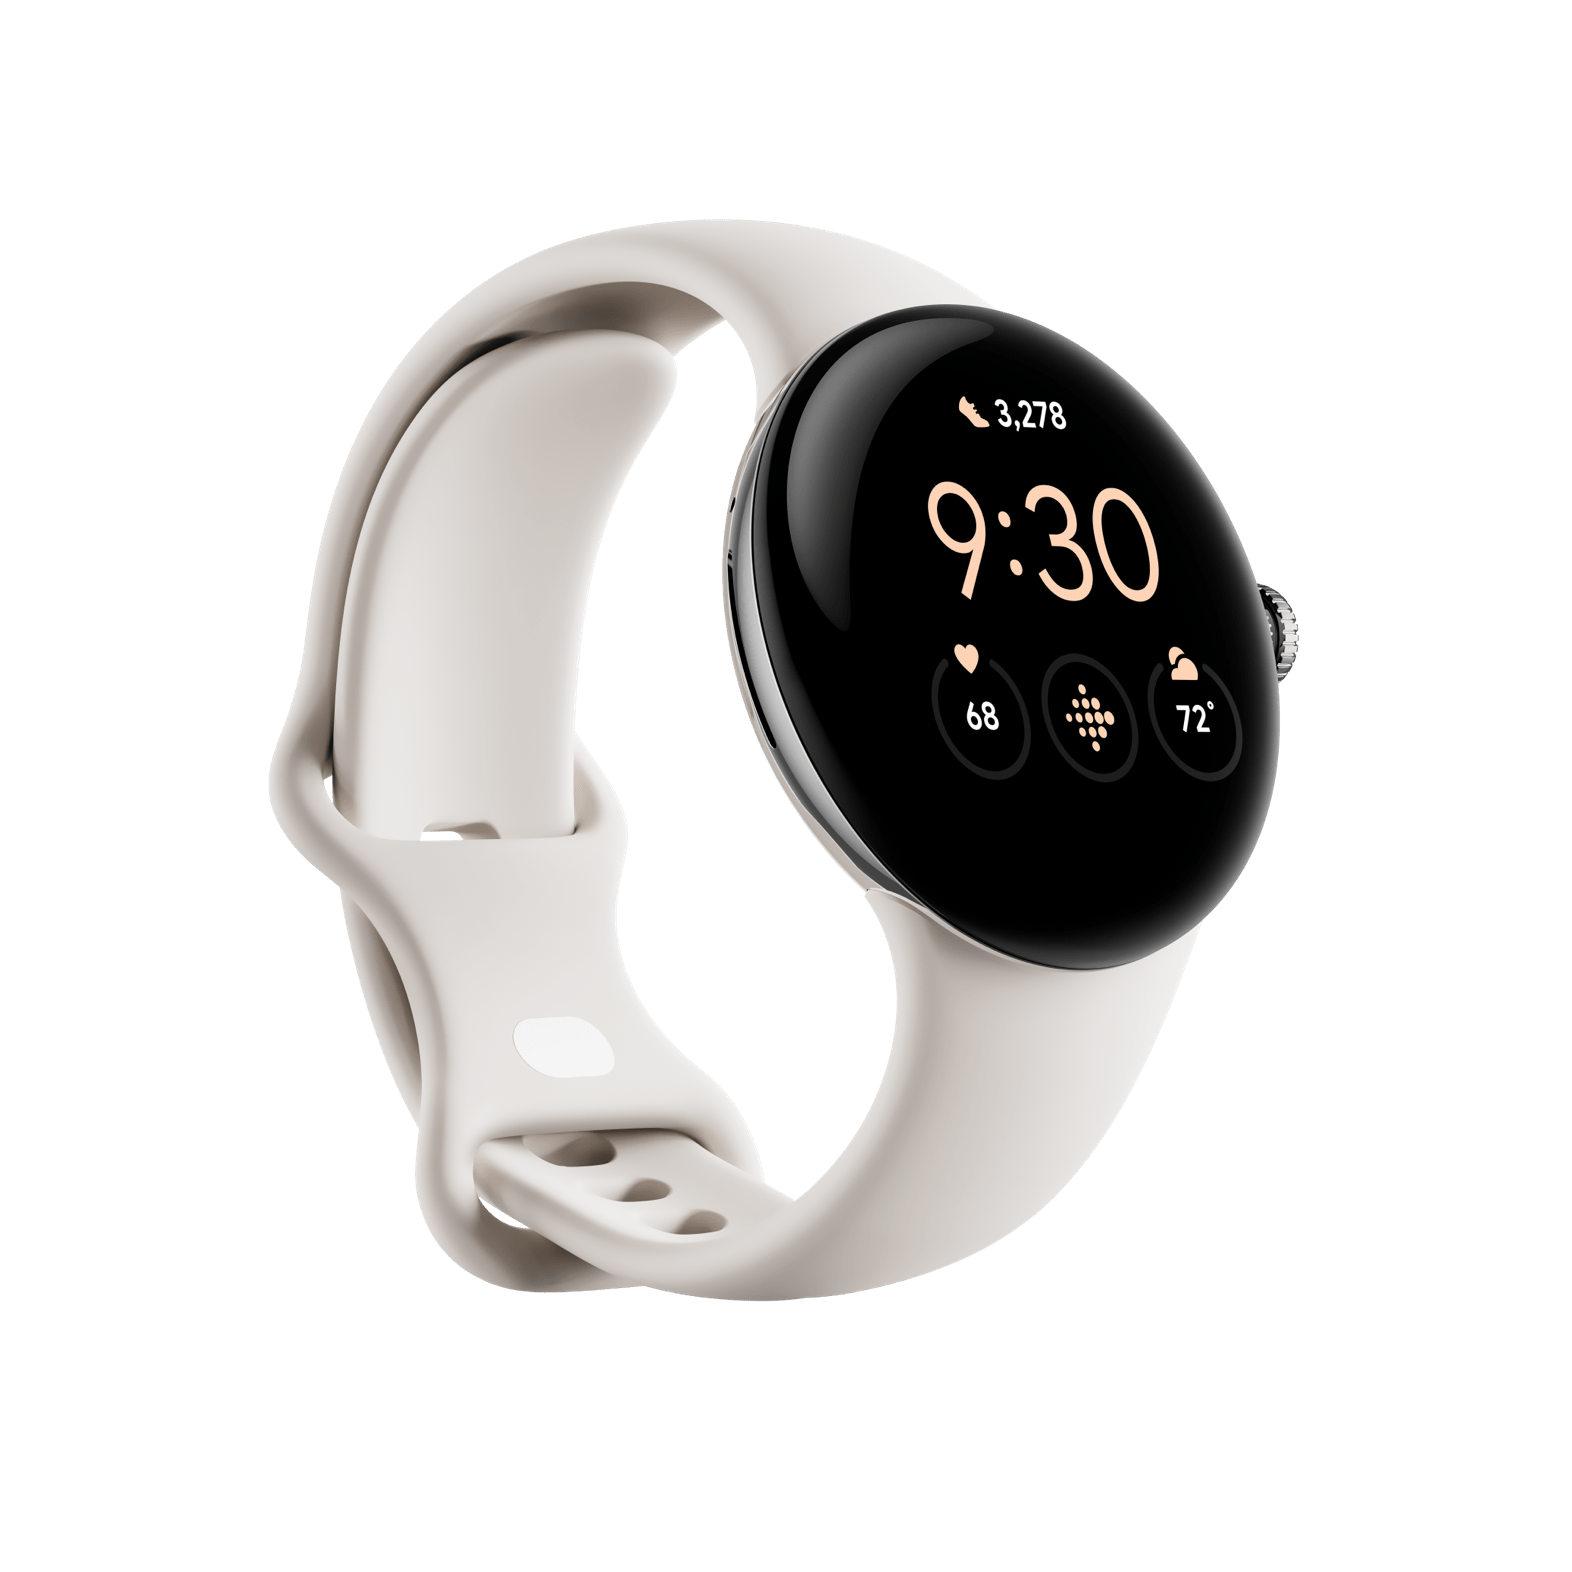 Google Pixel Watch Bluetooth / Wi-Fi (Chalk / Polished Silver Stainless Steel)